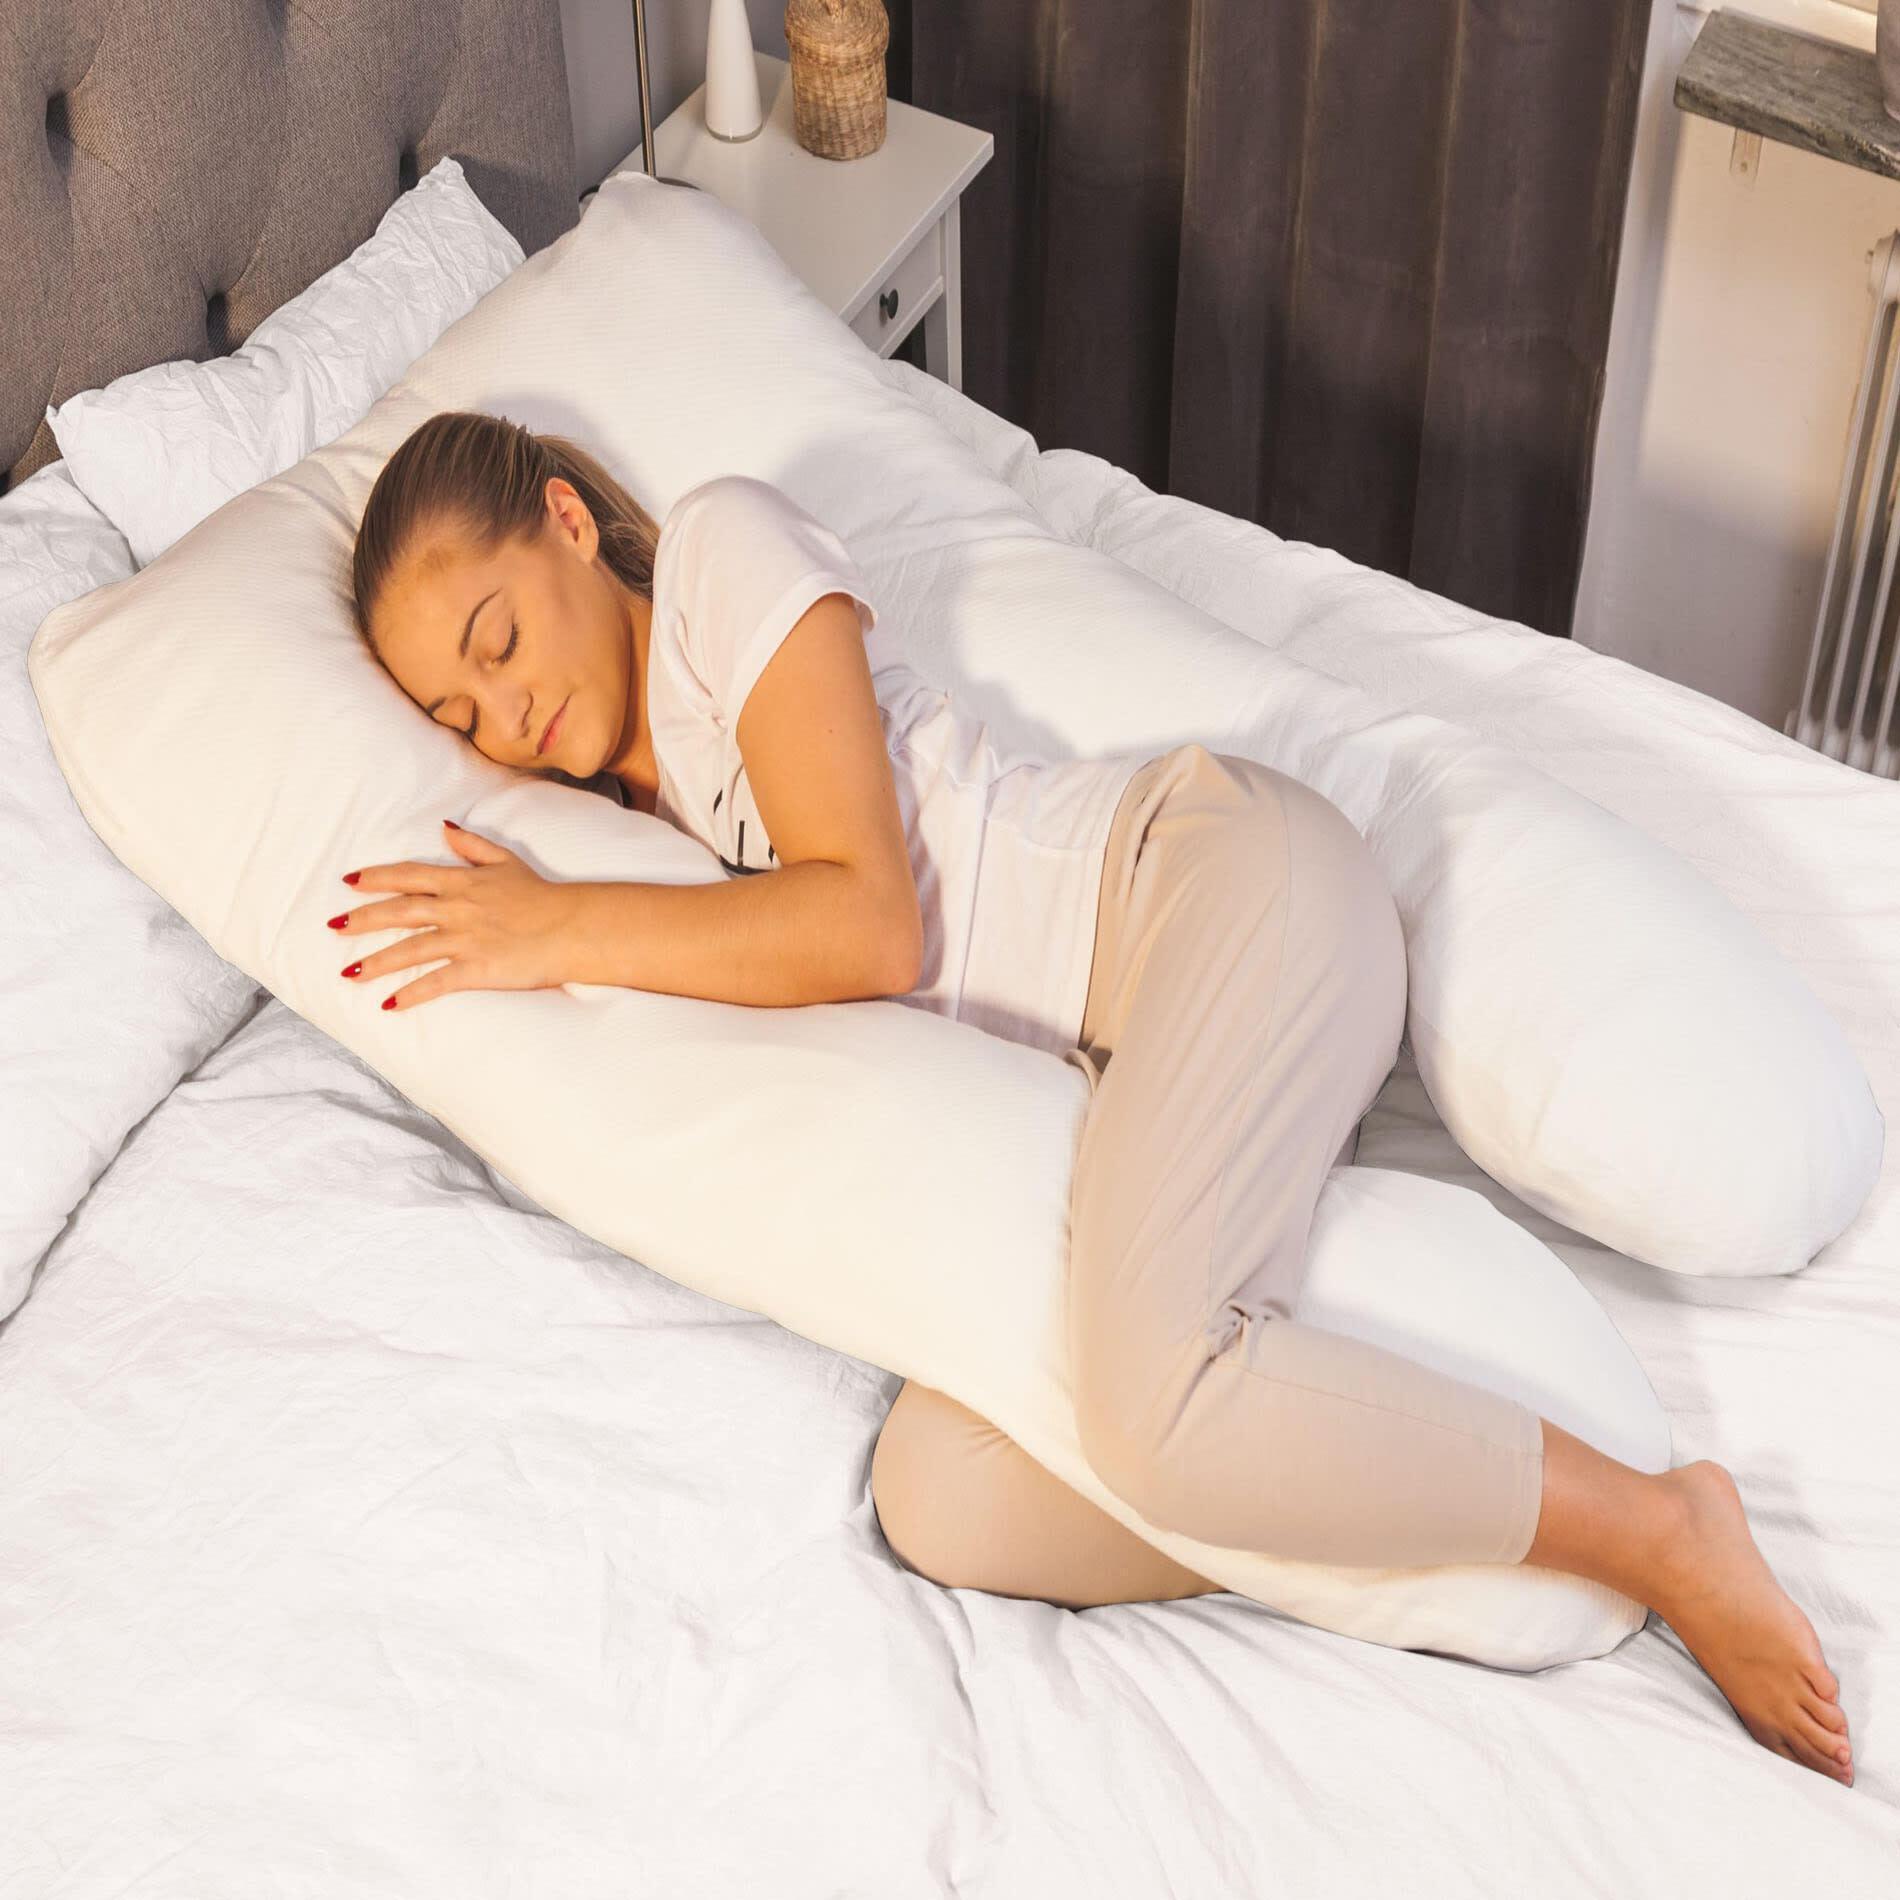 View Pregnancy Body Pillow Maternity Pillows for Sleeping 9FT White information